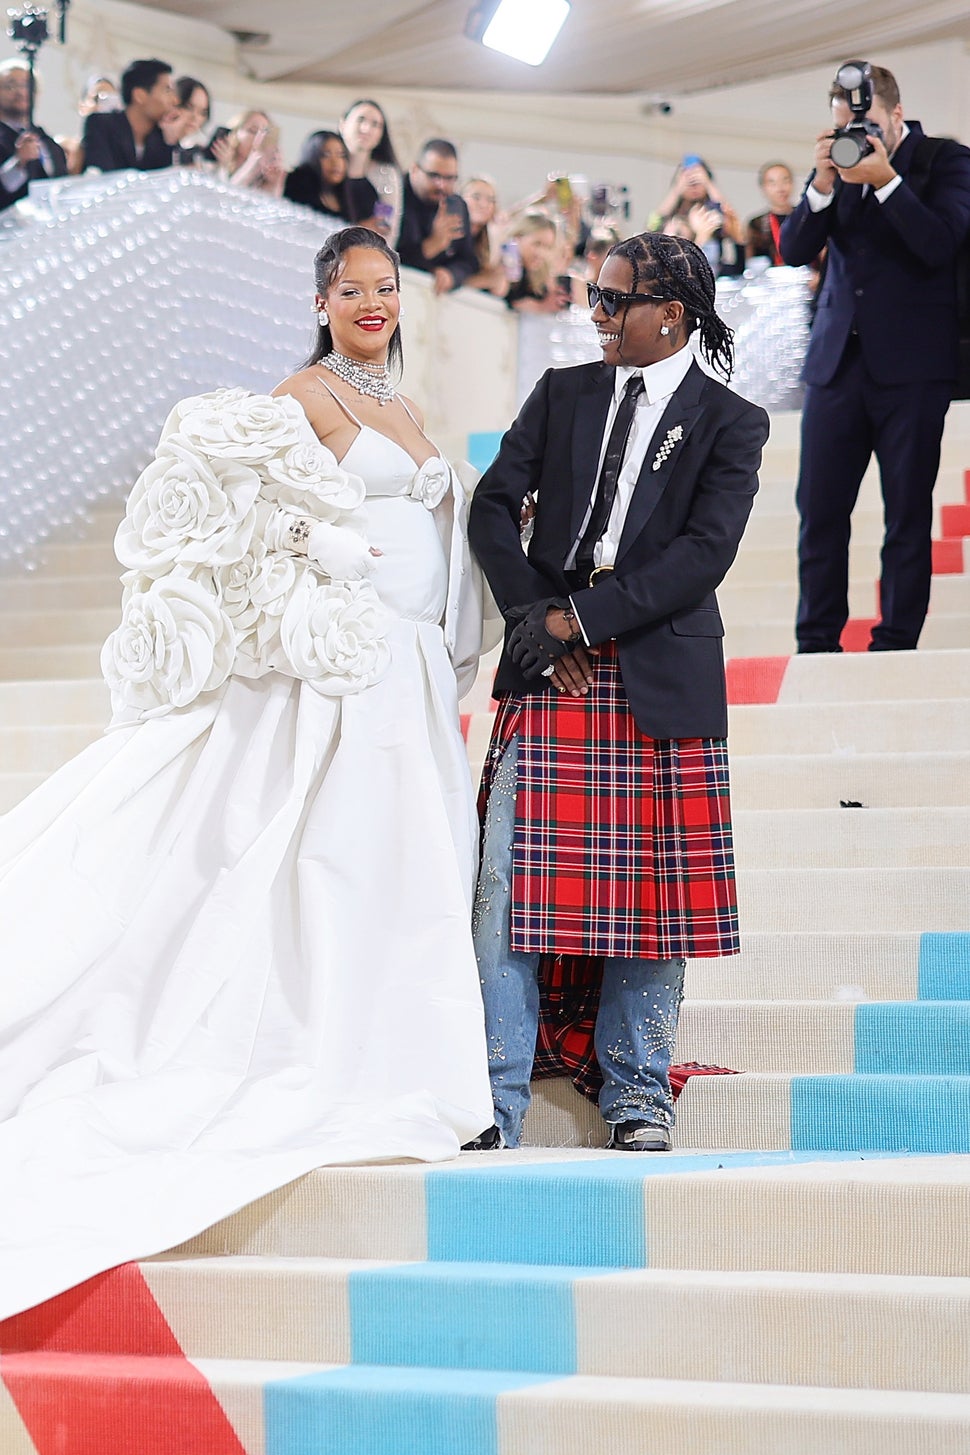 ASAP Rocky wearing suit with red plaid skirt and Rihanna wearing white dress with white floral jacket